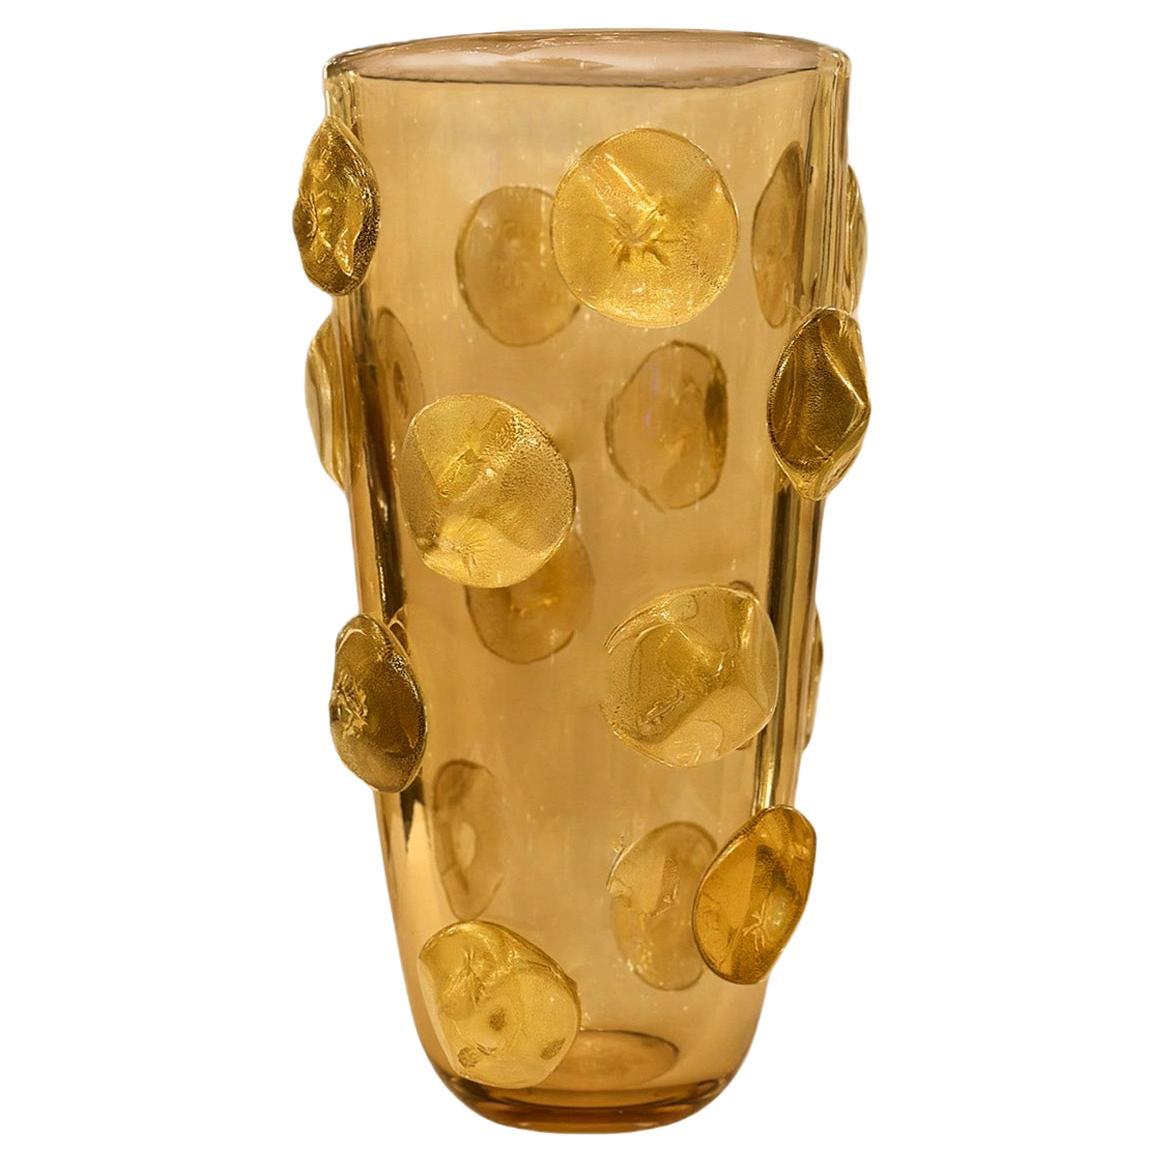 Hand Blown Topaz Murano Glass Vase With Gold Leaf Infused Raised Dot Design For Sale